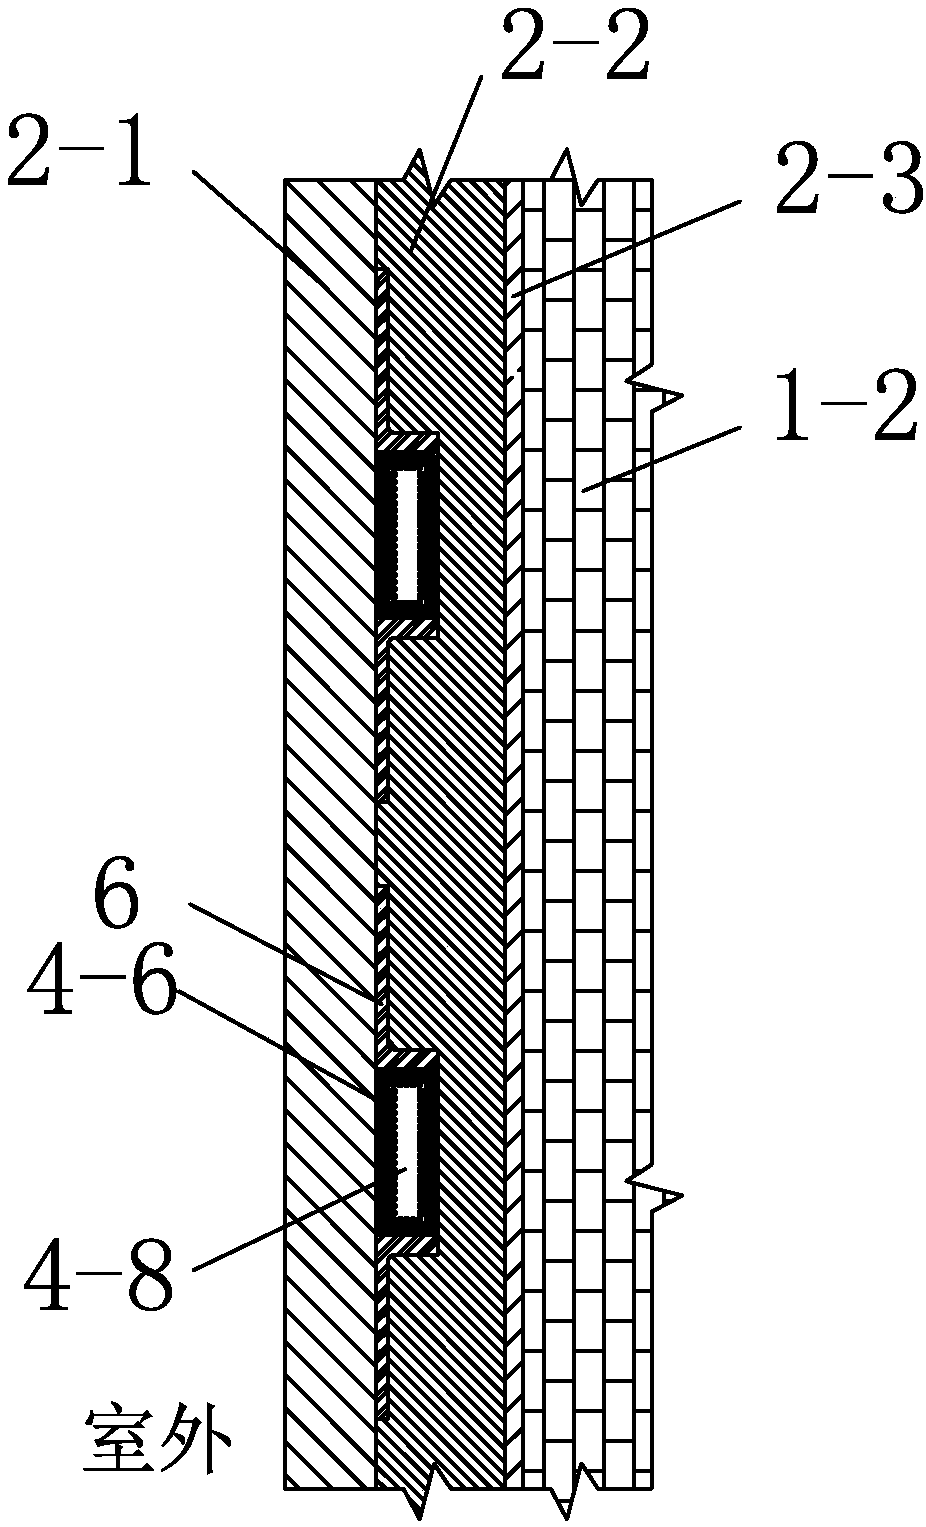 Passive composite wall for ultra-low energy construction